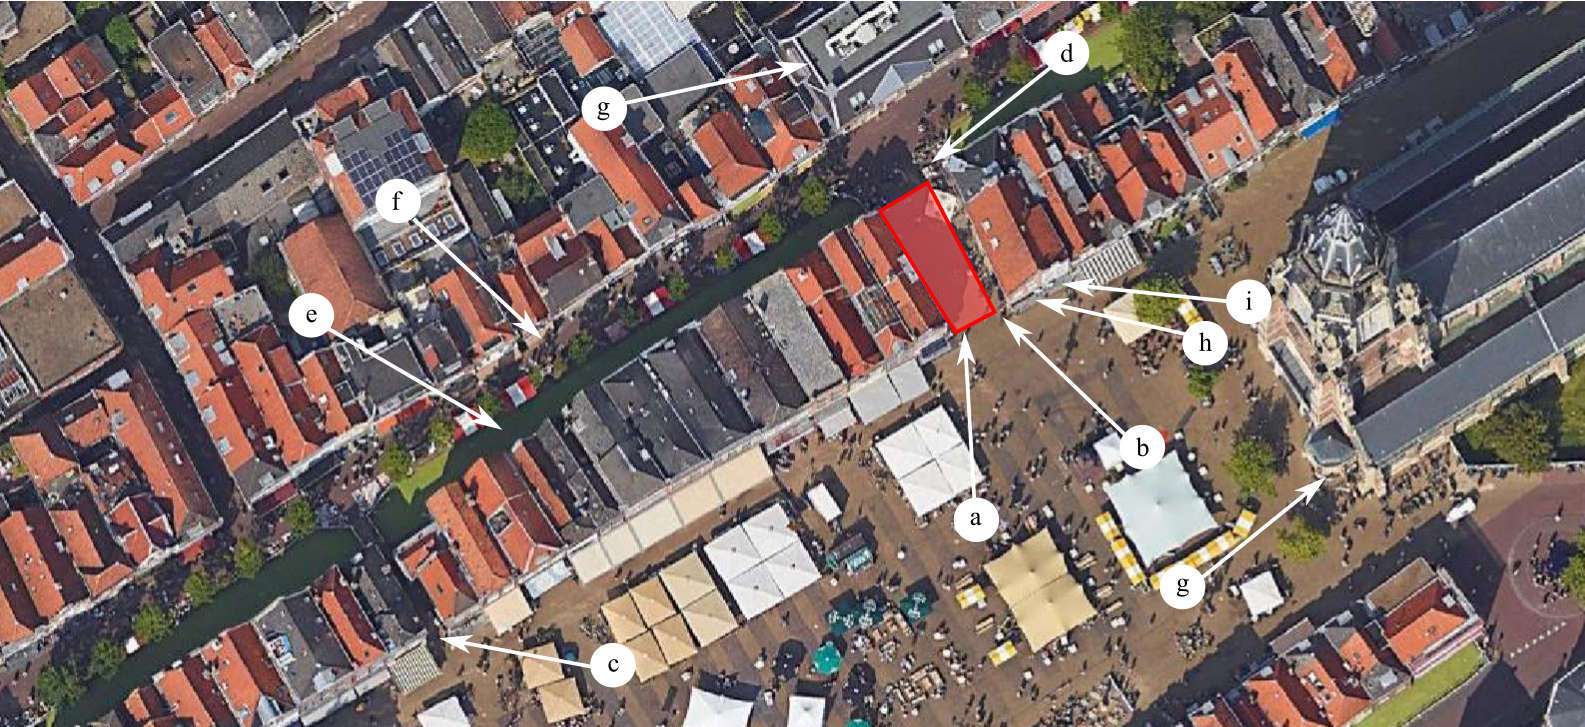  A birds-eye veiw of the north side of Goroote Markt with the original positon of Mechelen outlined in red (with the nieuwe Kerk on the right)